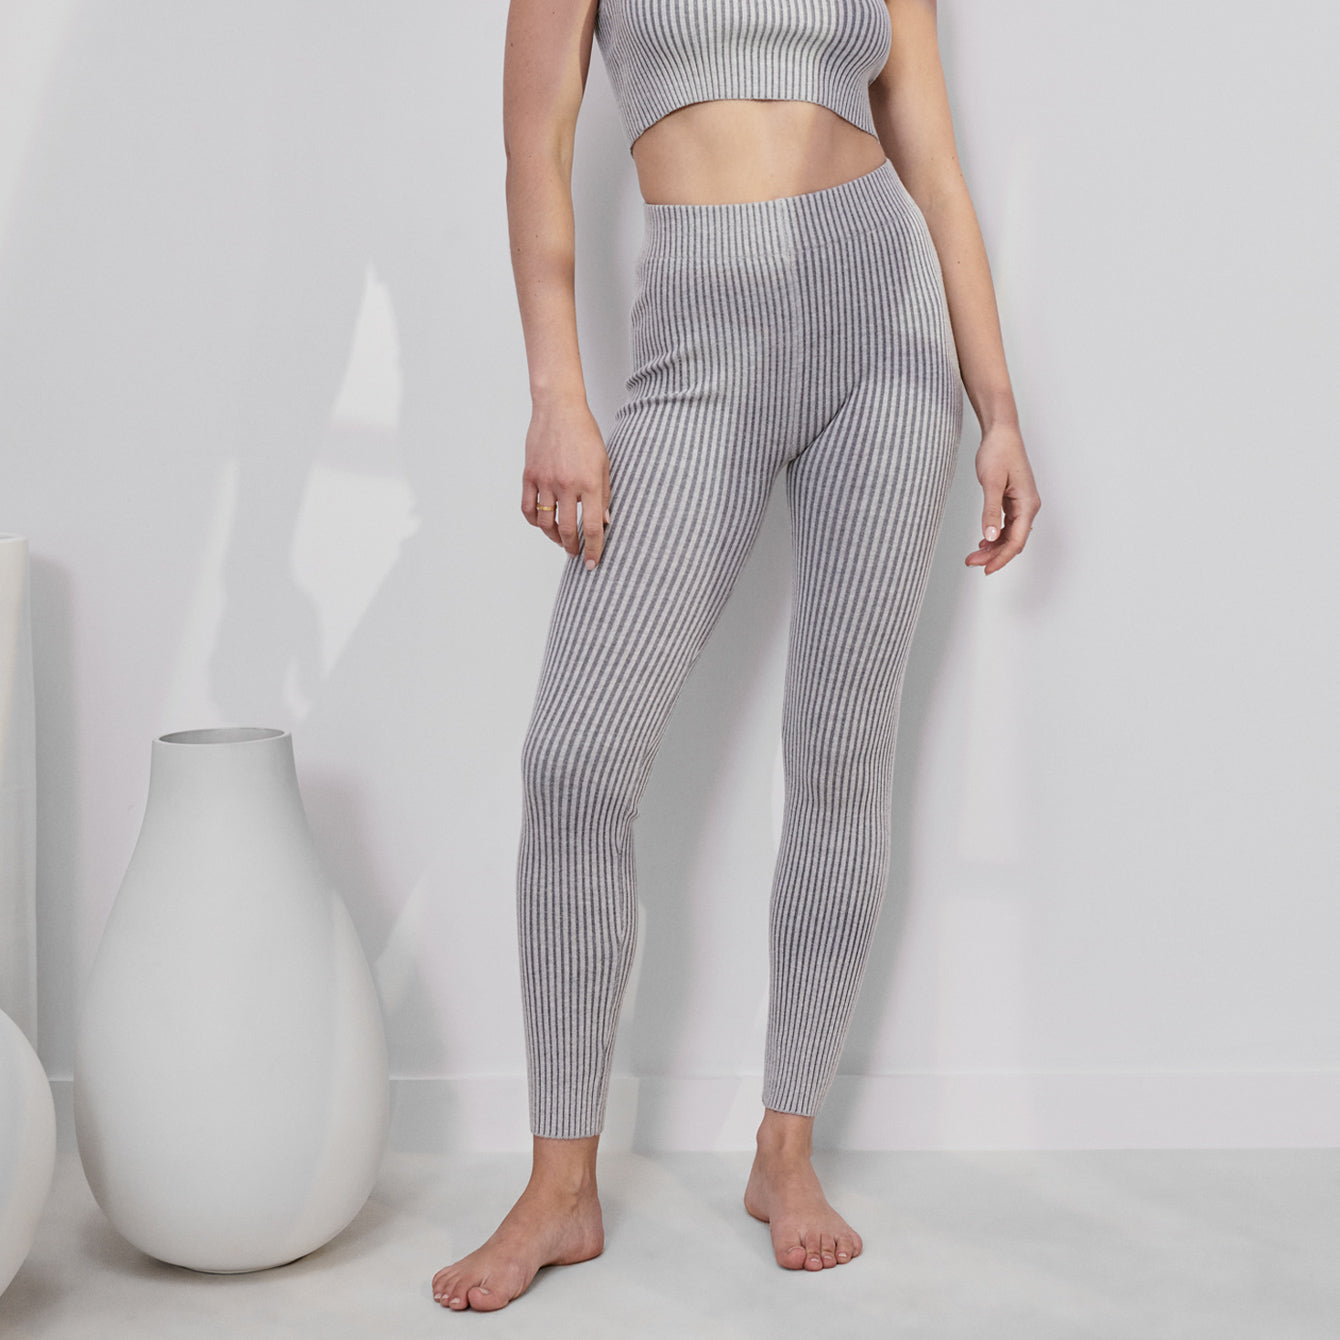 The Hugger Collection: Warm & Cozy Leggings & Tops